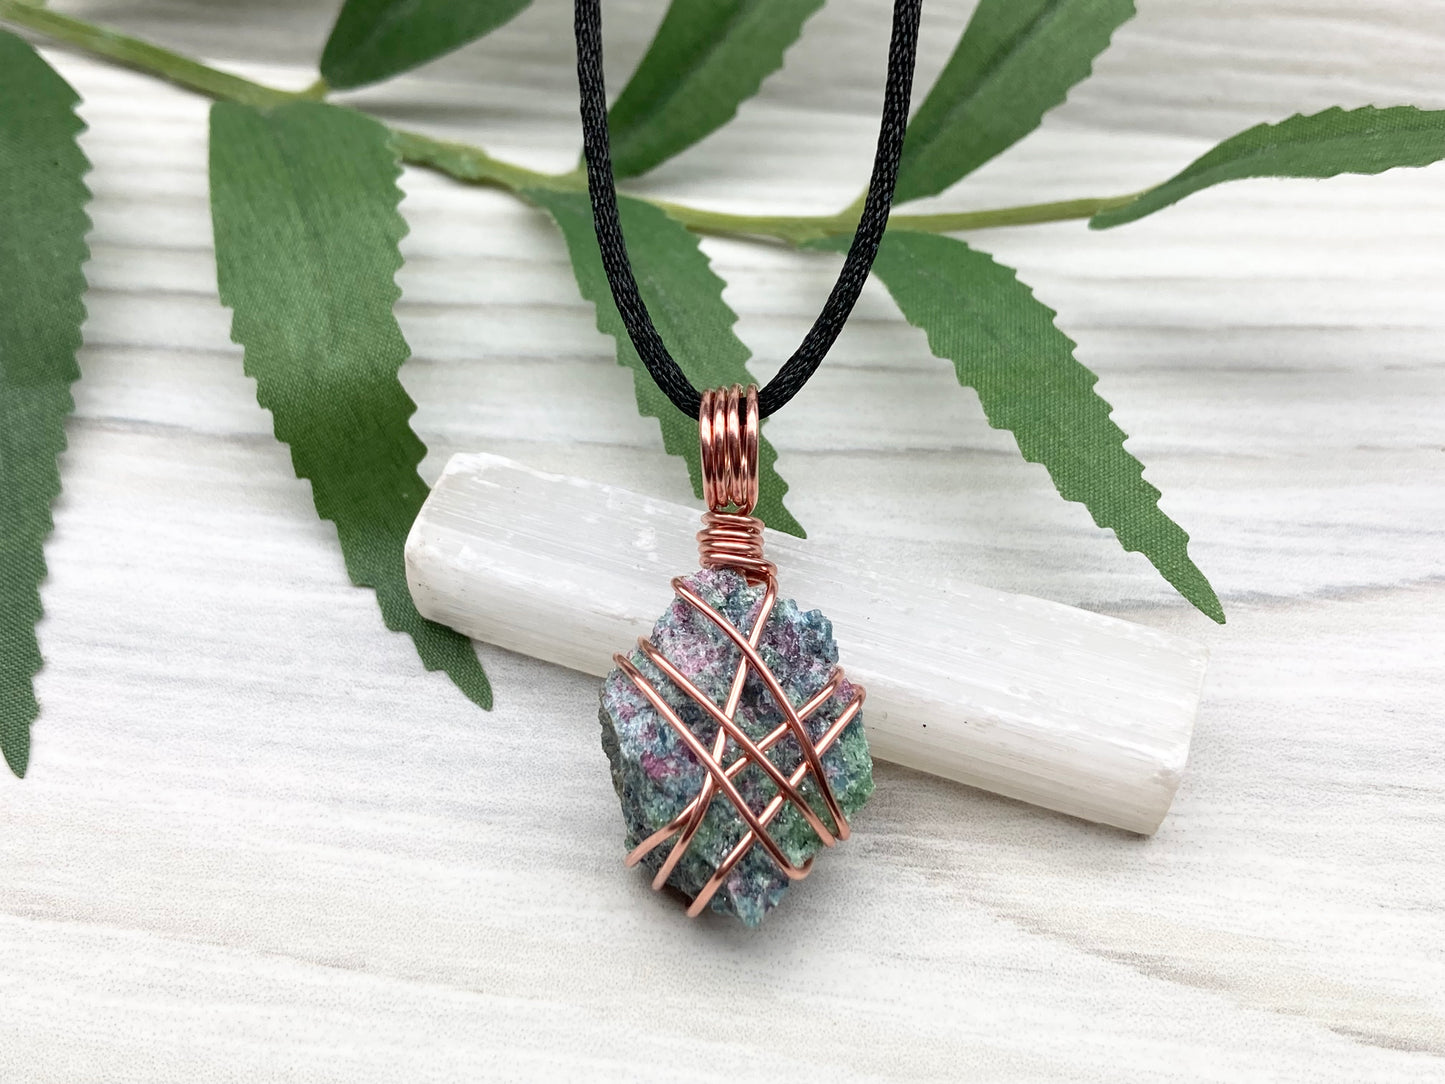 Raw Ruby Zoisite Necklace. This Ruby Zoisite Crystal Is Hand Wrapped With Pure Copper Wire For A Pendant. This Stone is Blue, Red And Green Colored. Comes On A Black Chain. Spiritual New Age Style Jewelry.